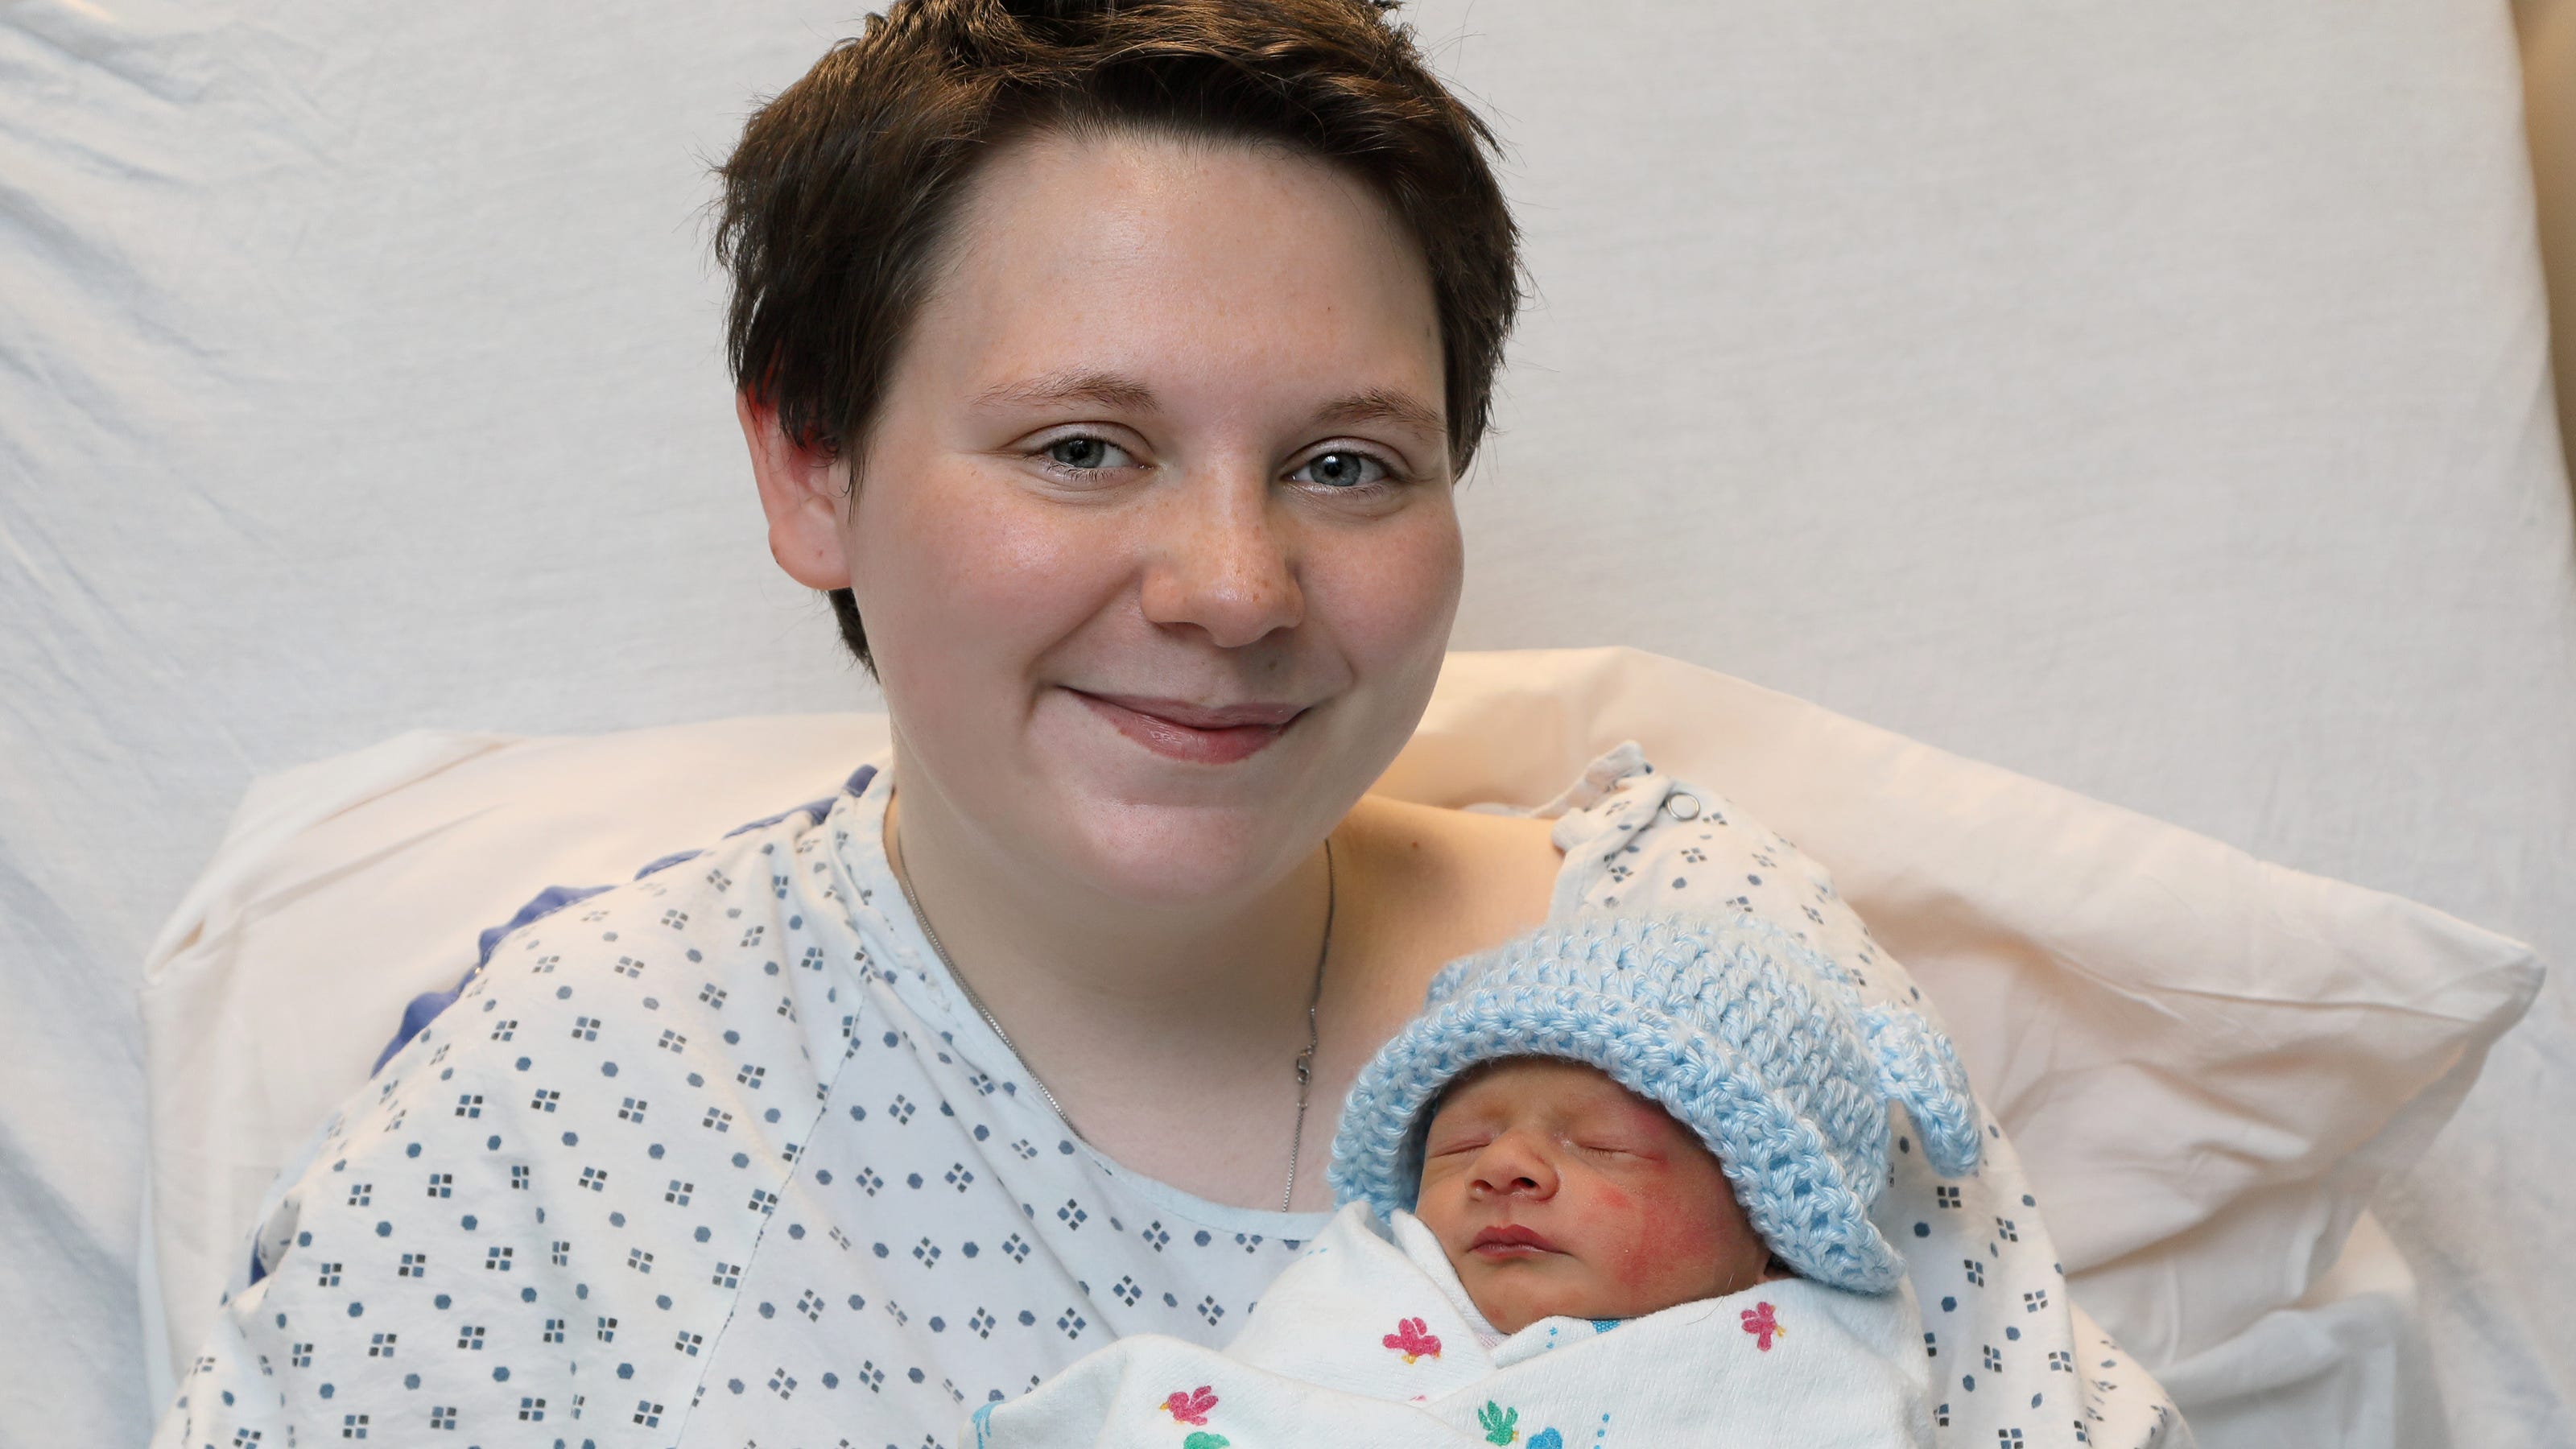   
																Staunton family welcomes first baby of 2023 at Augusta Health 
															 